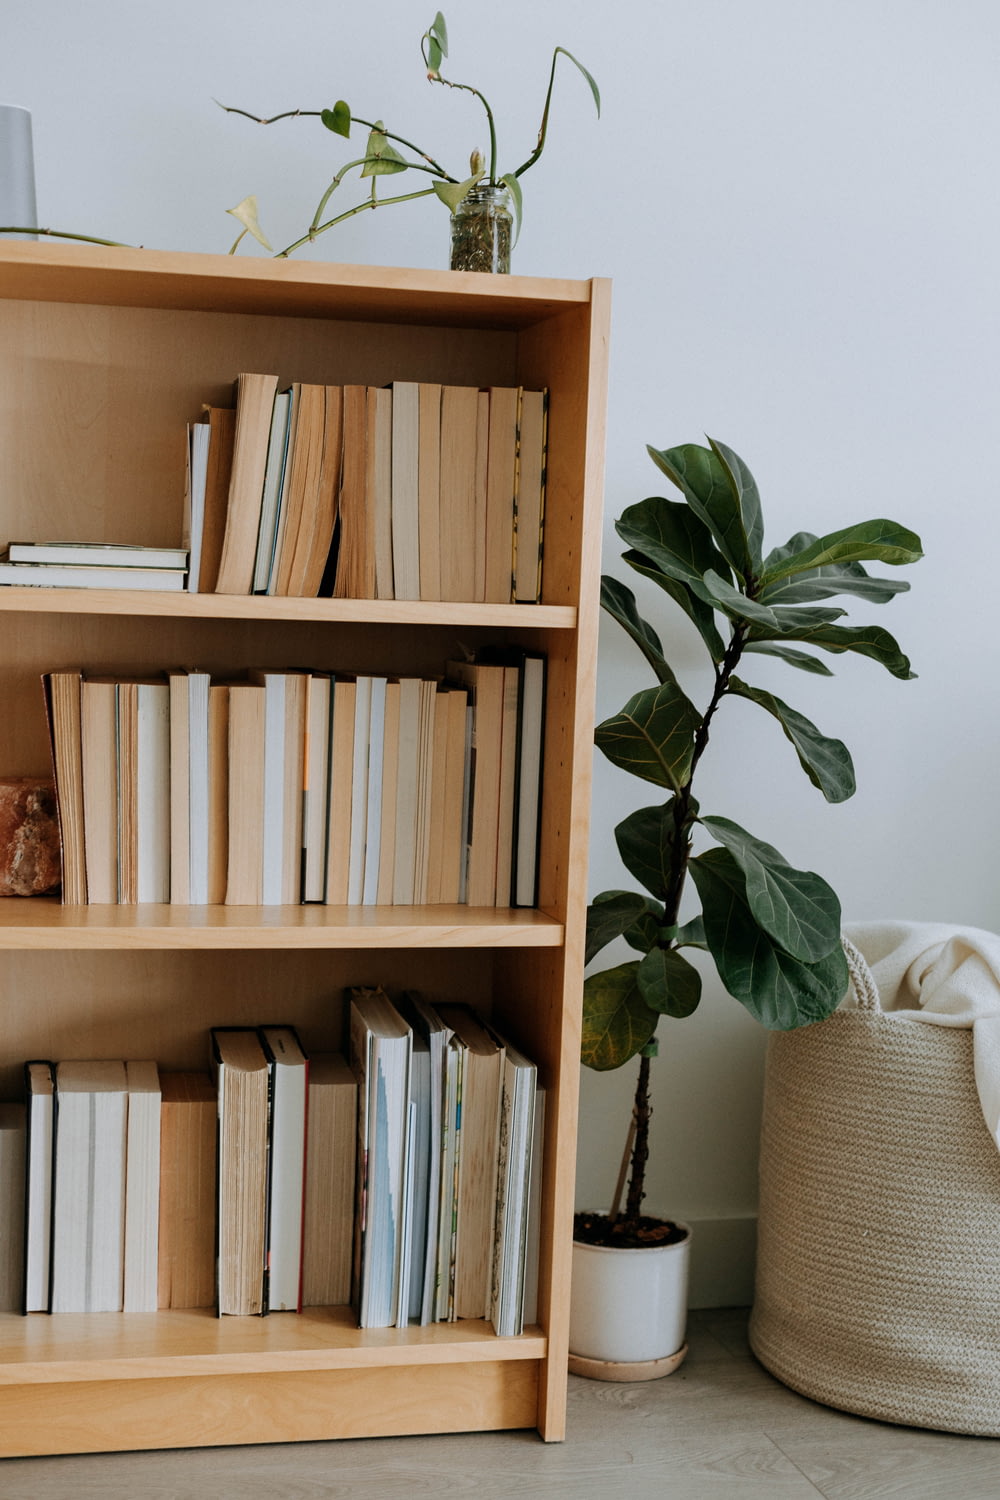 a bookshelf filled with lots of books next to a potted plant